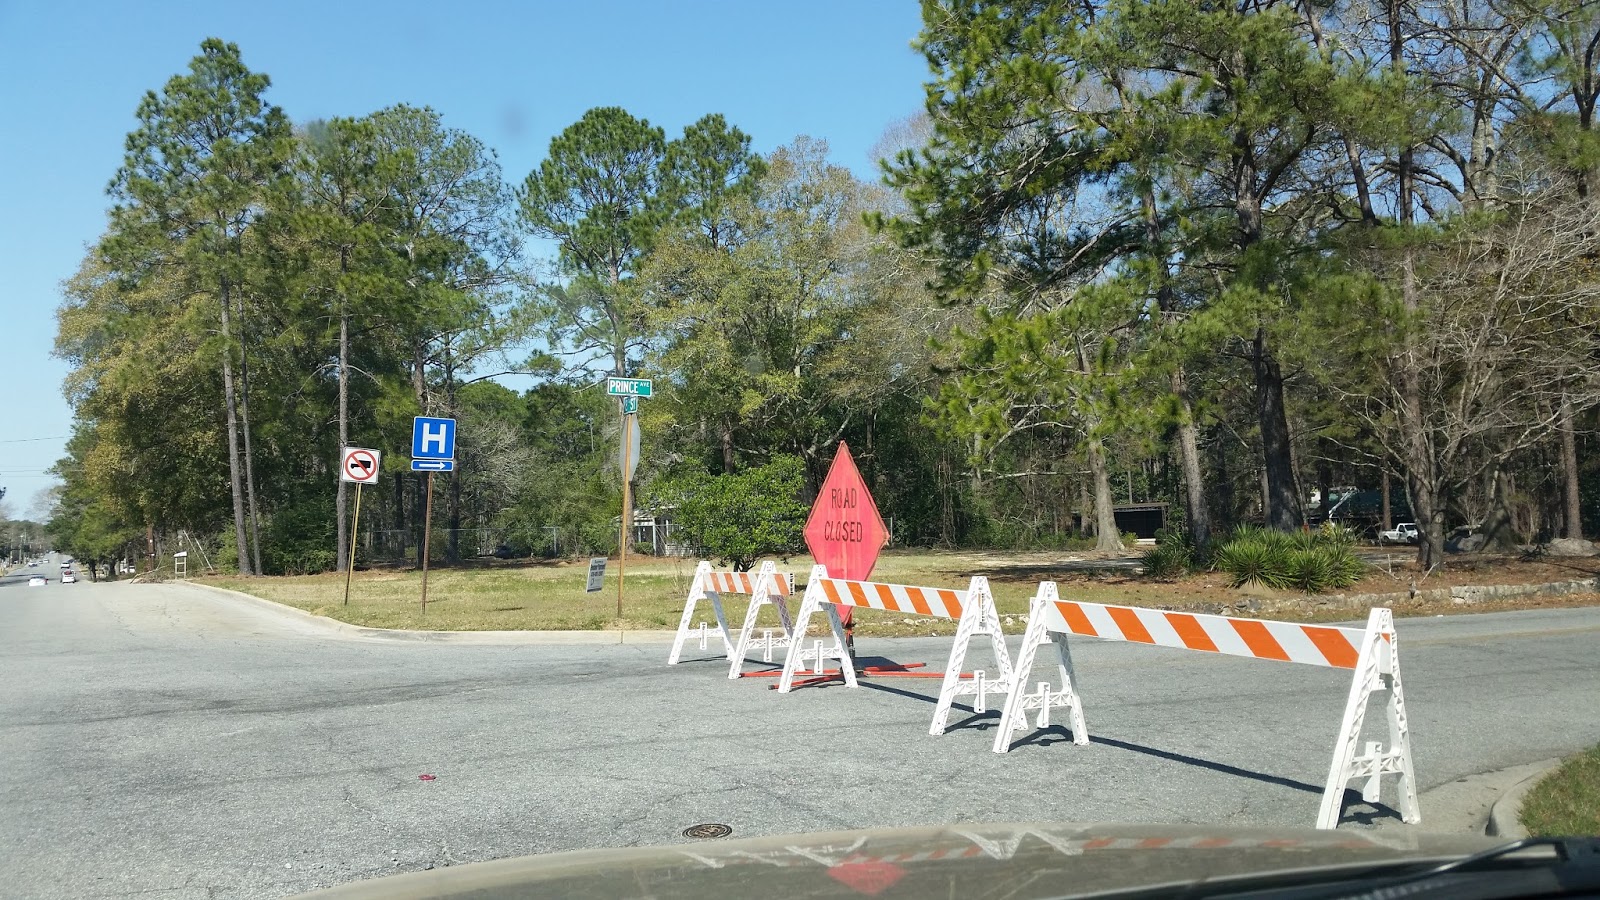 Tiftarea News: Utility Work Being Done On Prince Ave./Old Ocilla Road Today